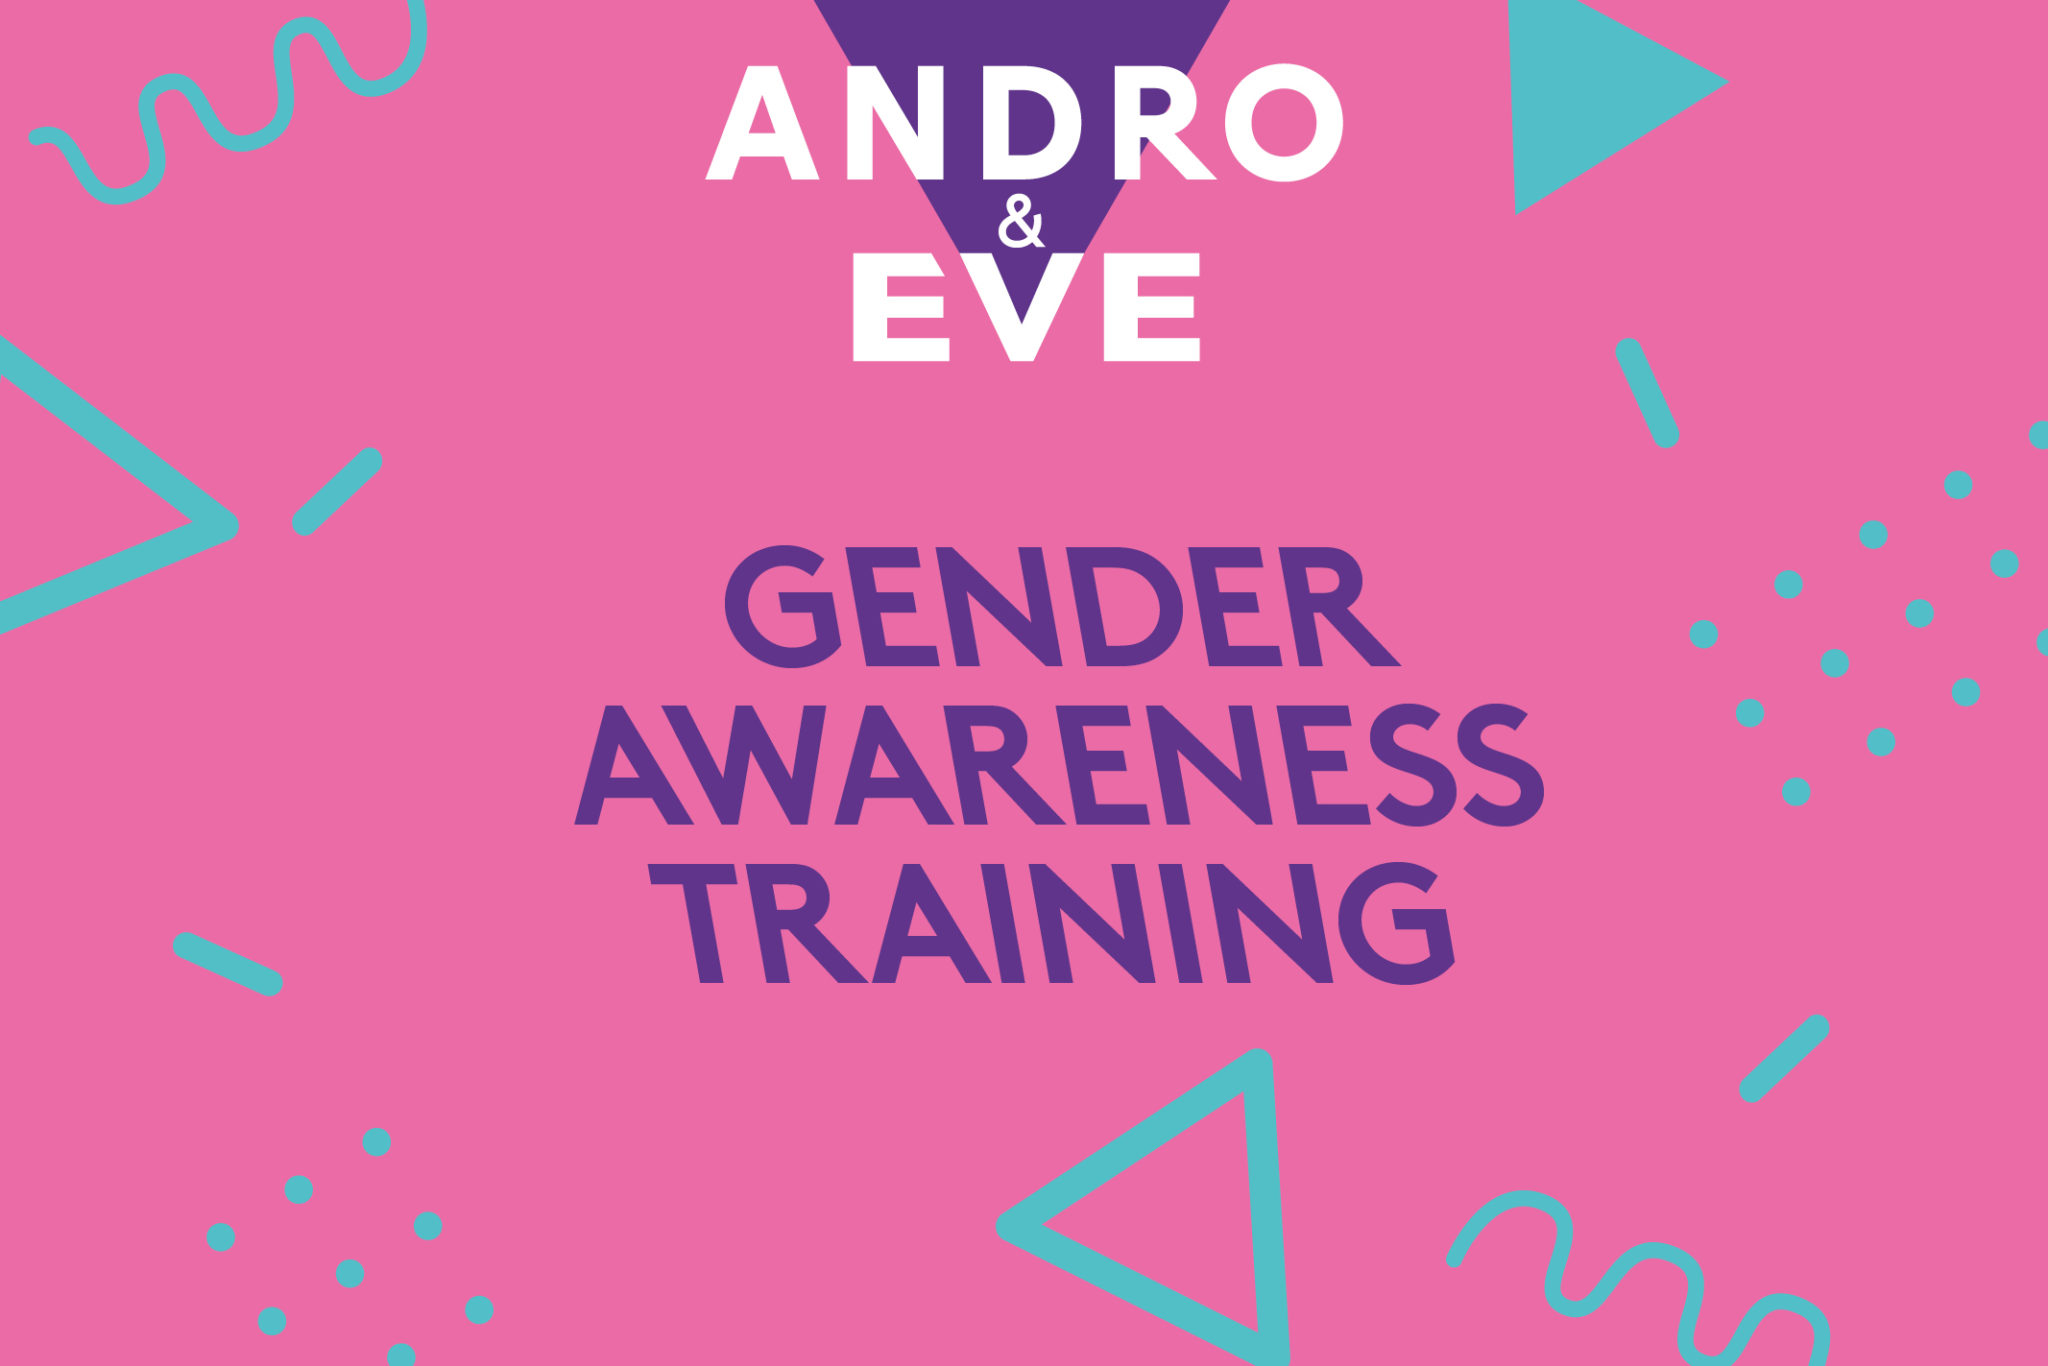 a pink square has turquoise squiggles and geometric shapes across it. At the top is Andro and Eve logo of inverted triangle in purple with white writing overlaid. In the centre of the image is the words Gender Awareness Training in purple text.